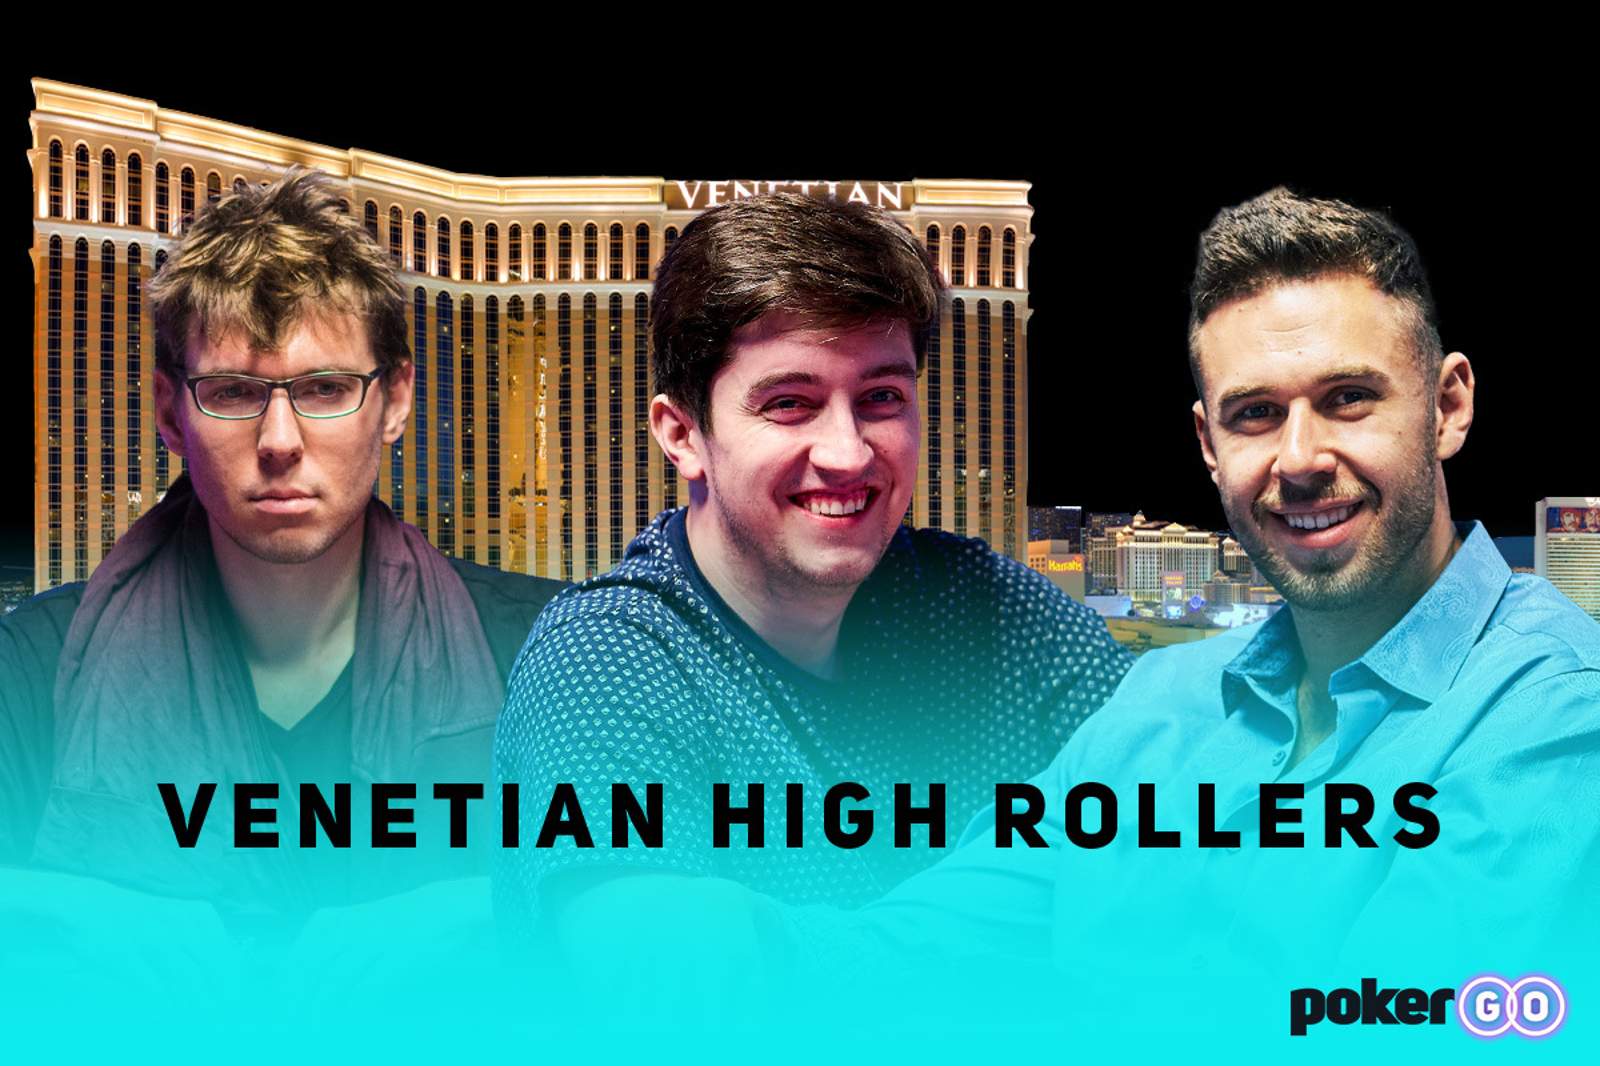 Venetian High Rollers Won by Andrew Lichtenberger, Ali Imsirovic, and Sean Perry